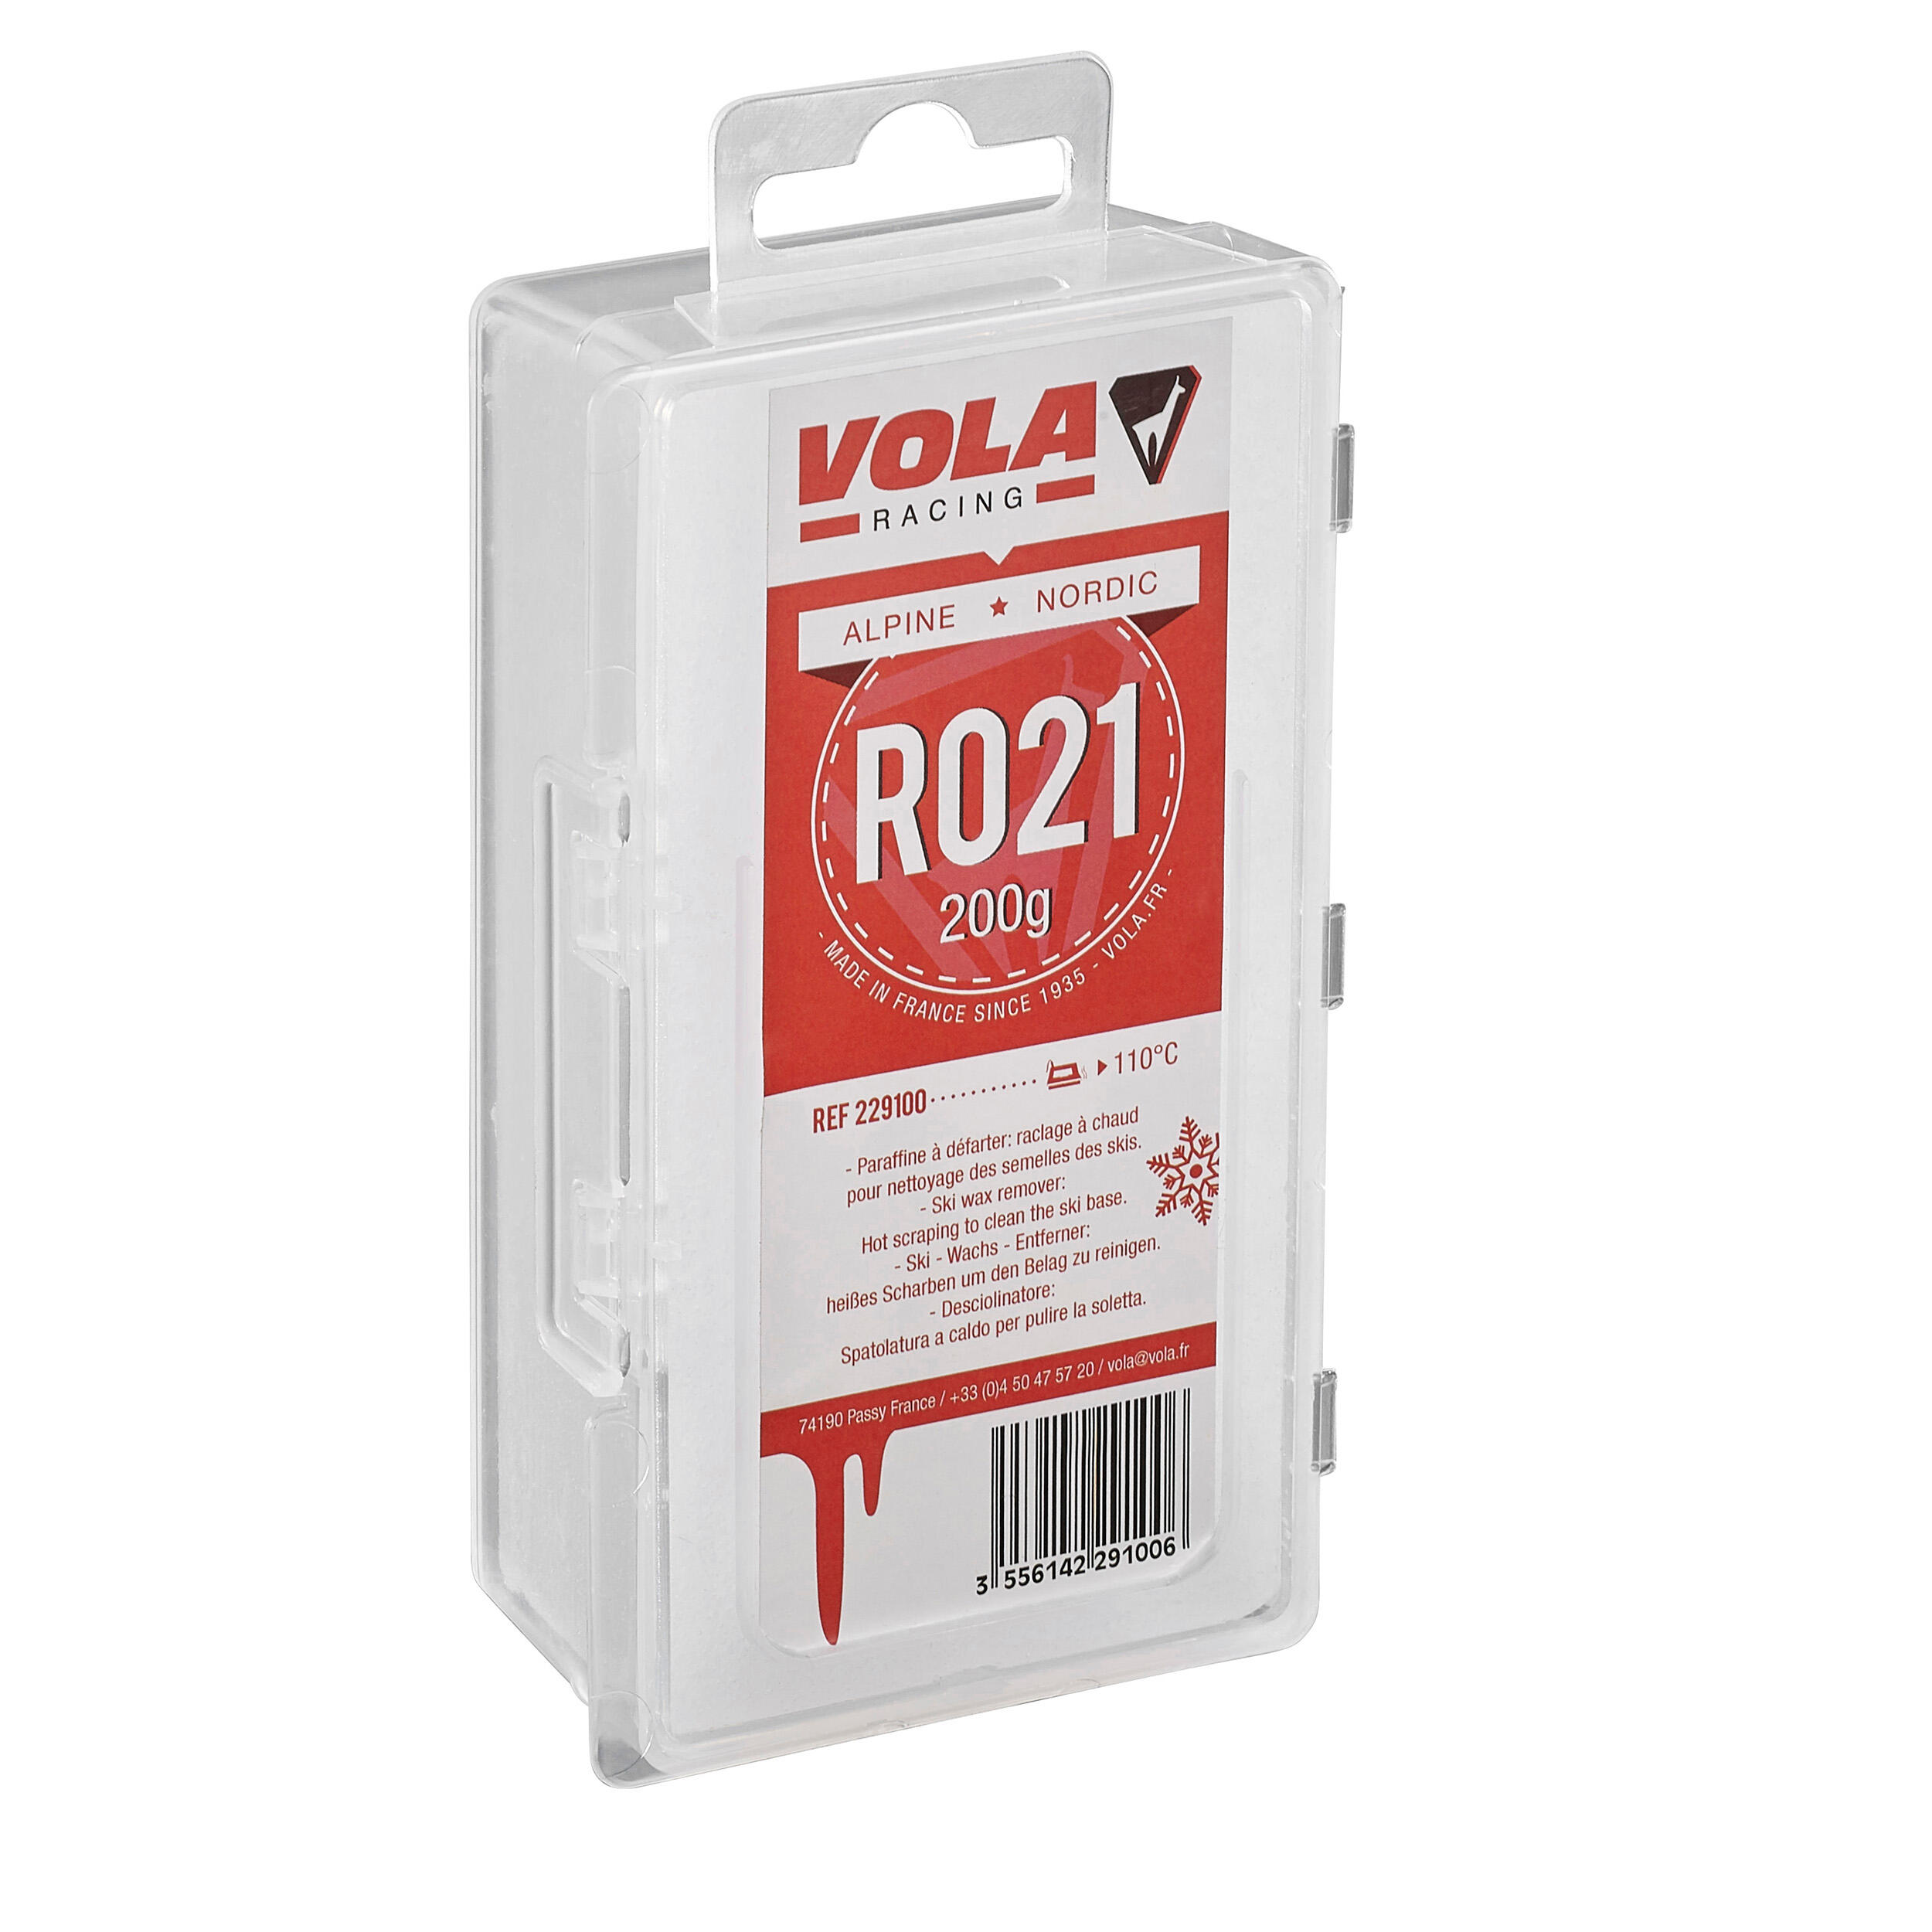 Paraffin Wax Remover VOLA R021 200g for skis and snowboards 2/2